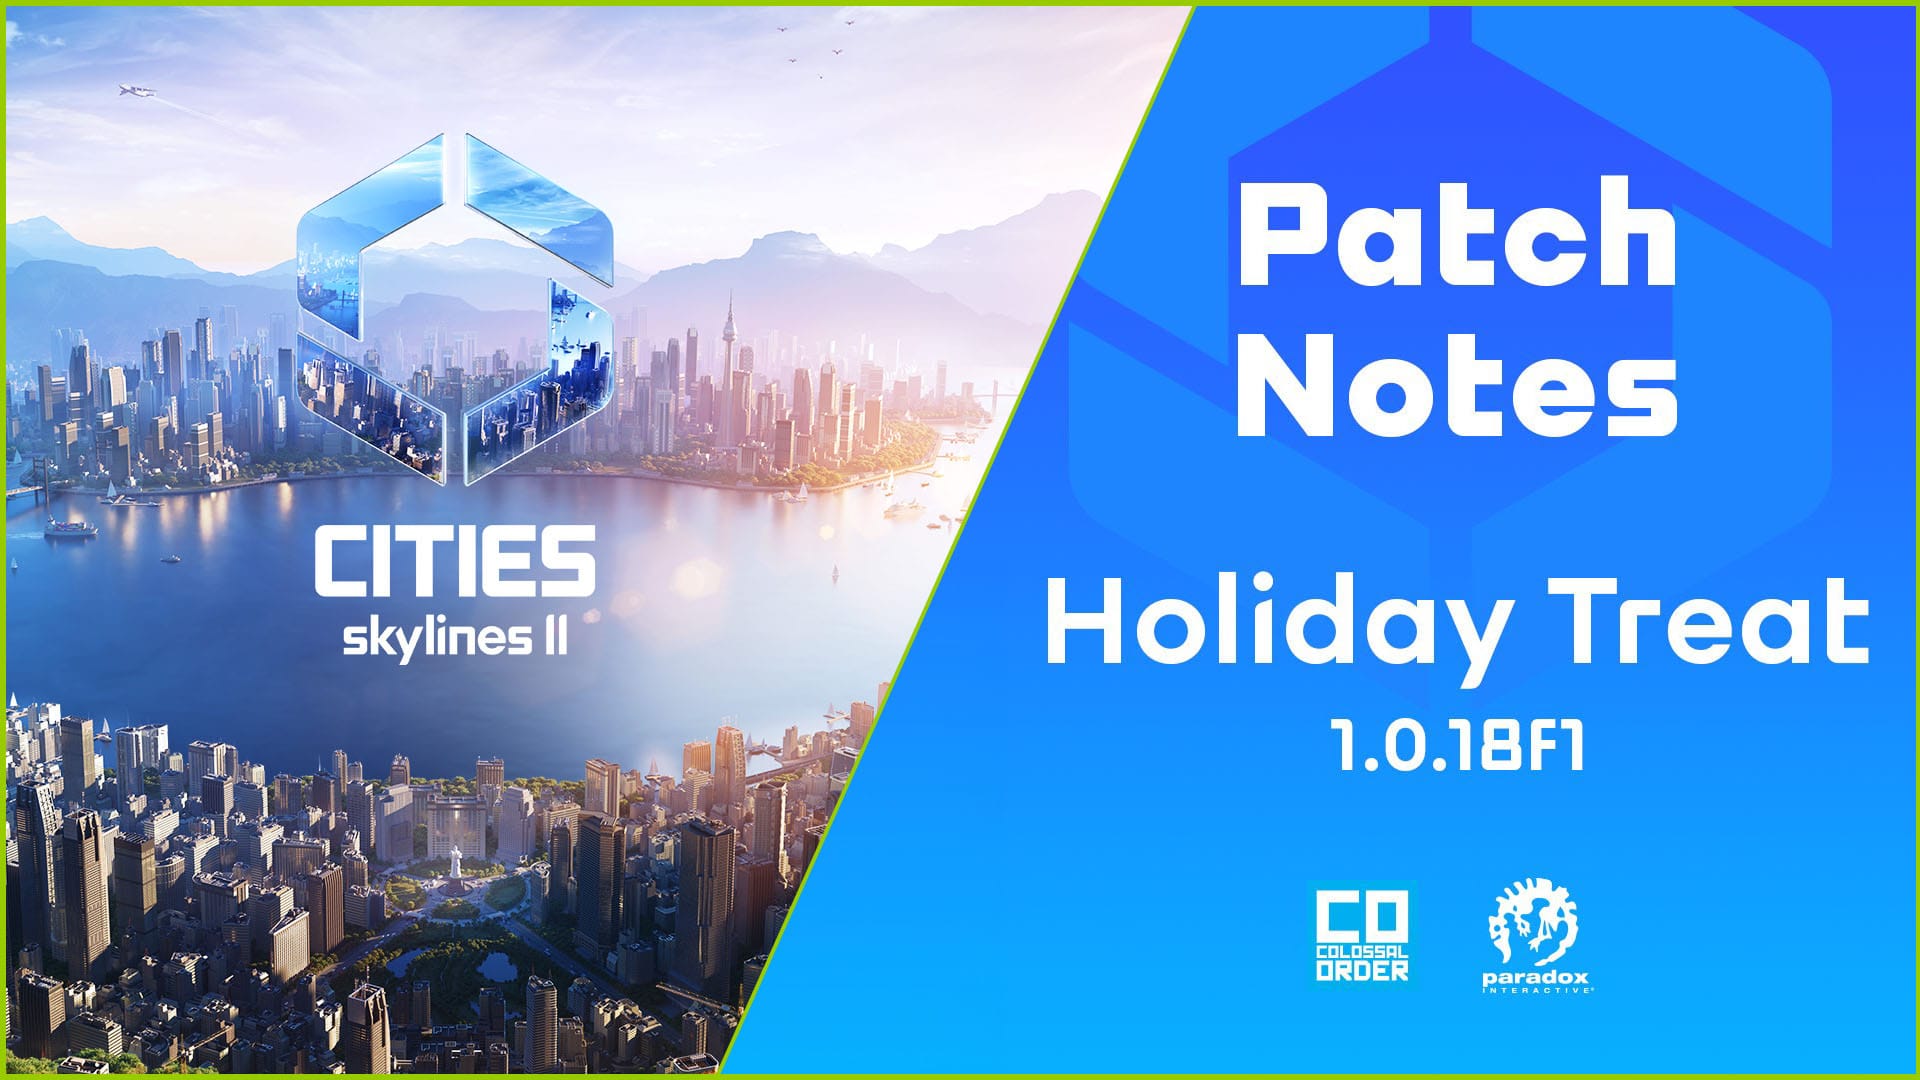 Cities: Skylines 2 Patch Available Now, Adds Character LODs to Improve Performance and More